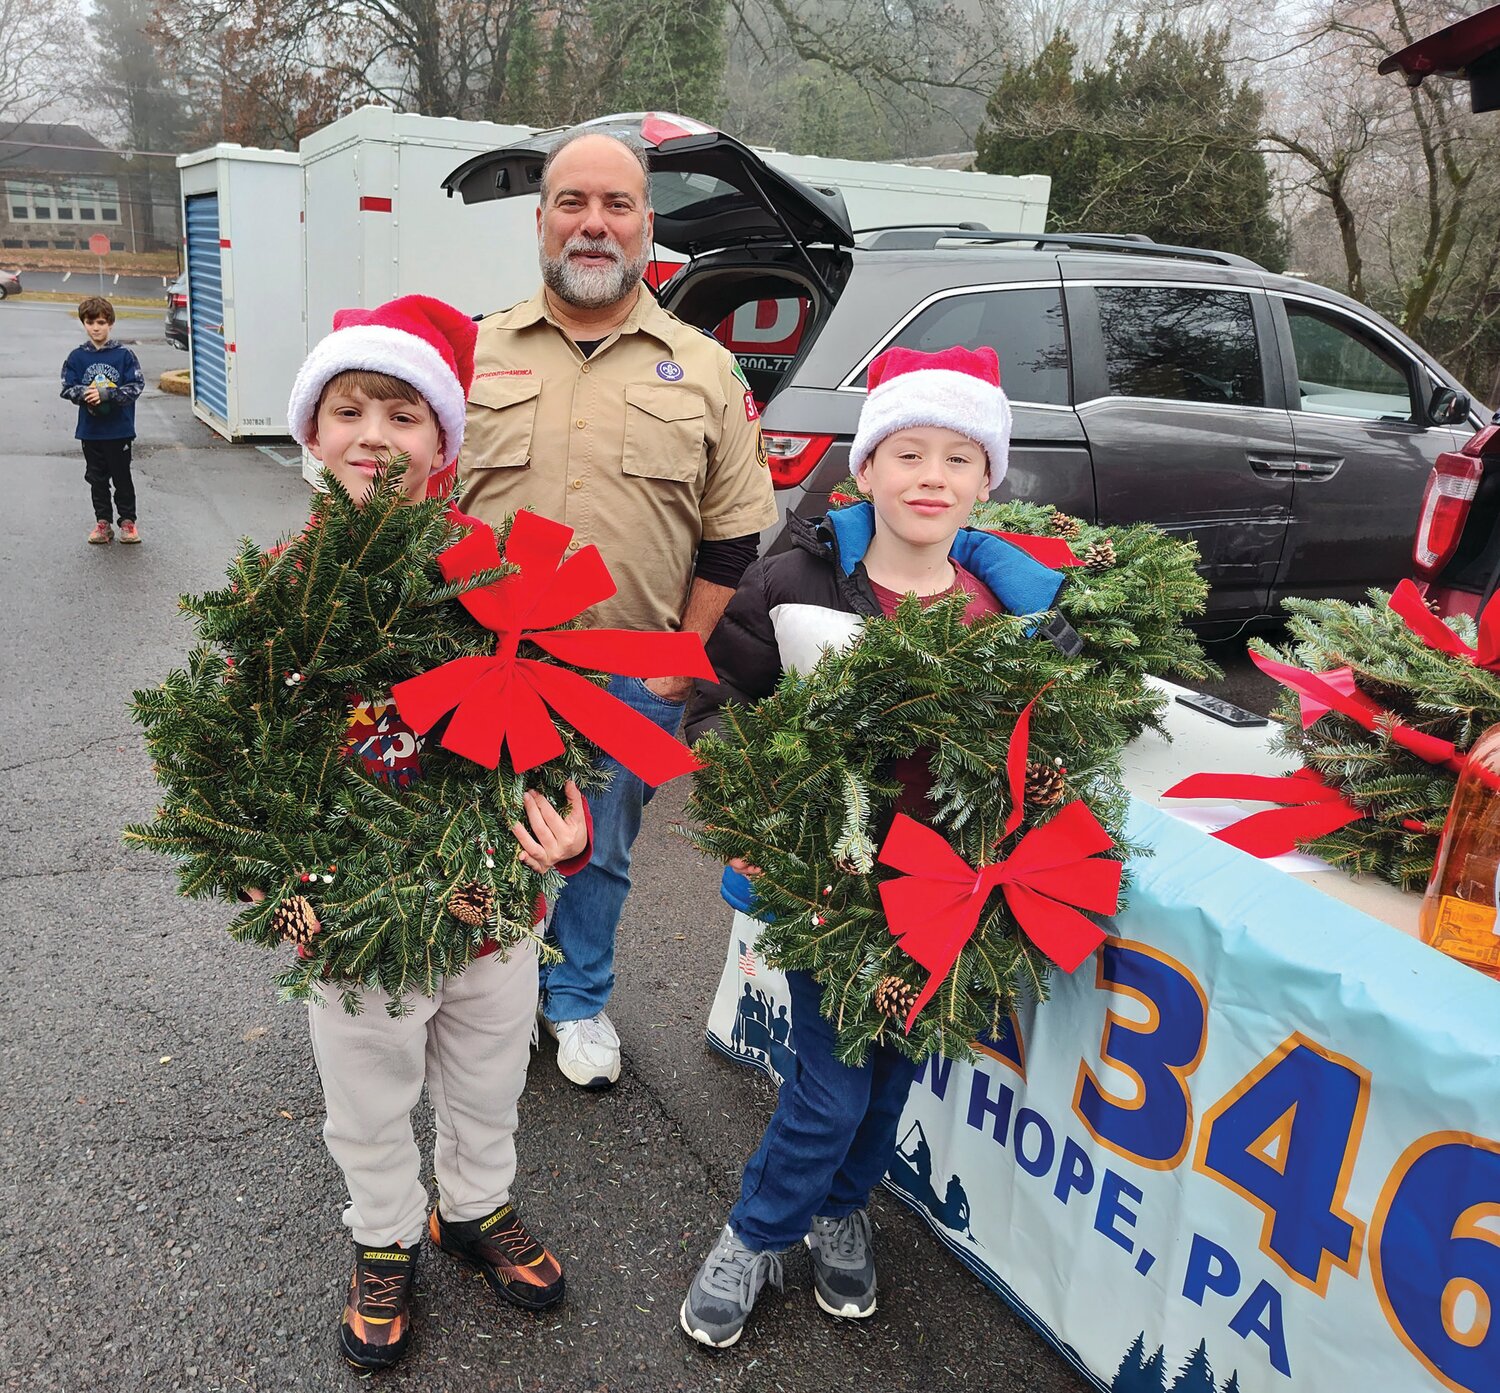 It’s the fundraising time of the year. Groups are asking for donations or raising funds in many ways. Two members of the Wolf Pack, Cub Scouts Pack 3464, sold Christmas wreaths for the Scouts outside Trinity Episcopal Church in Solebury during the church’s St. Nicholas Fair Dec. 2. Oscar Hammerstein IV, left, is with his friend John Jorgensen. Vince Napoli, Webelos Arrow of Light den leader, is behind the boys.